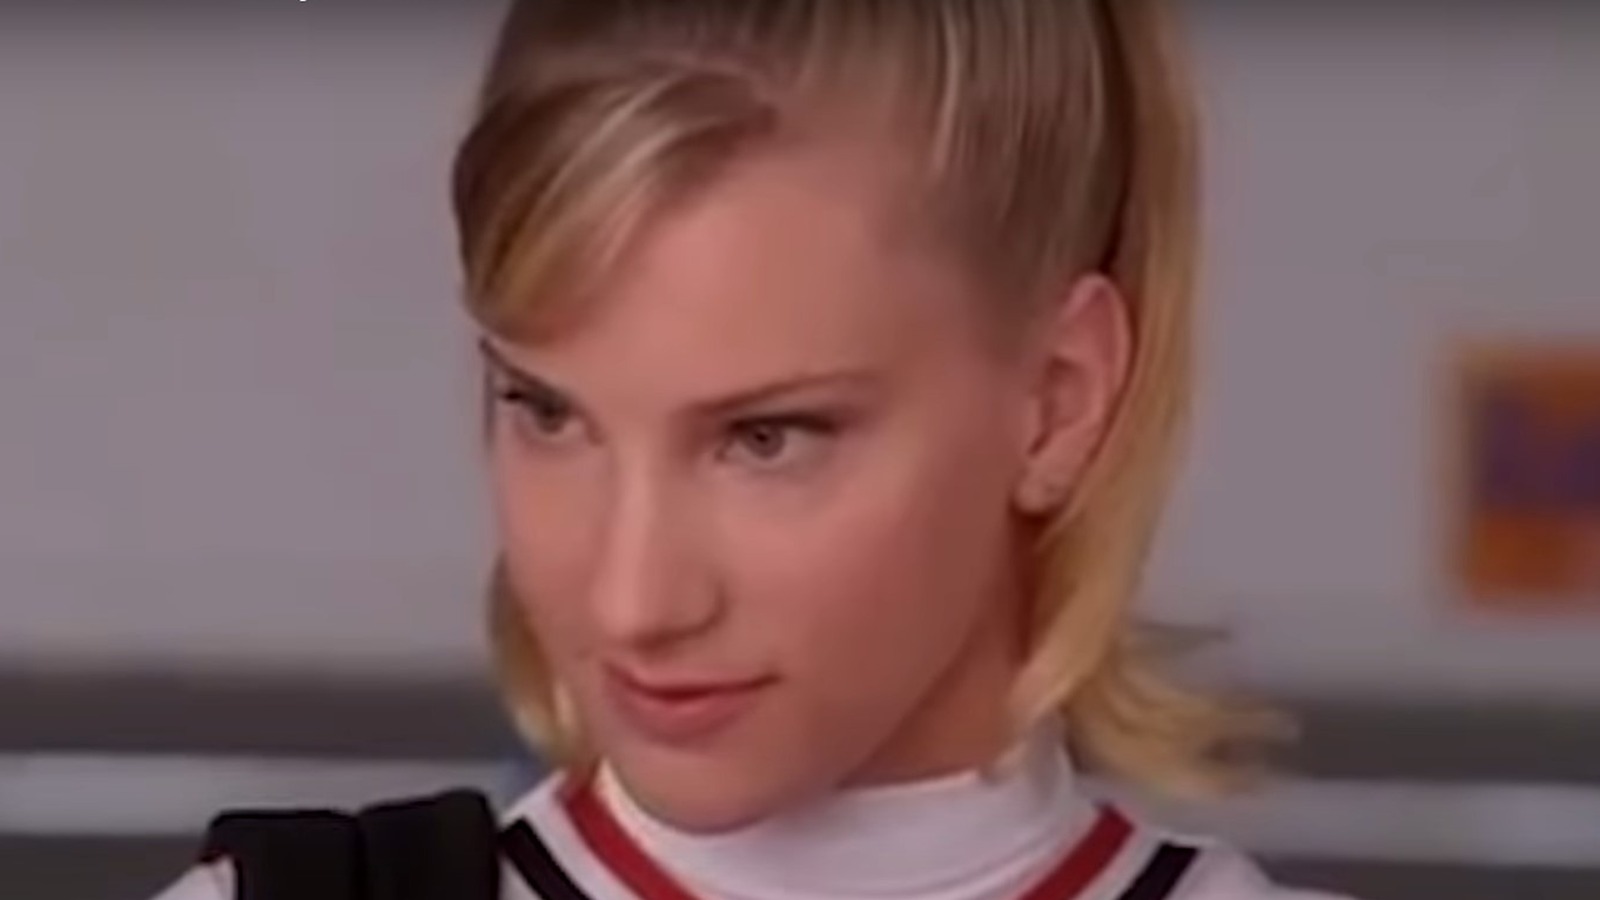 Why did brittany leave glee?